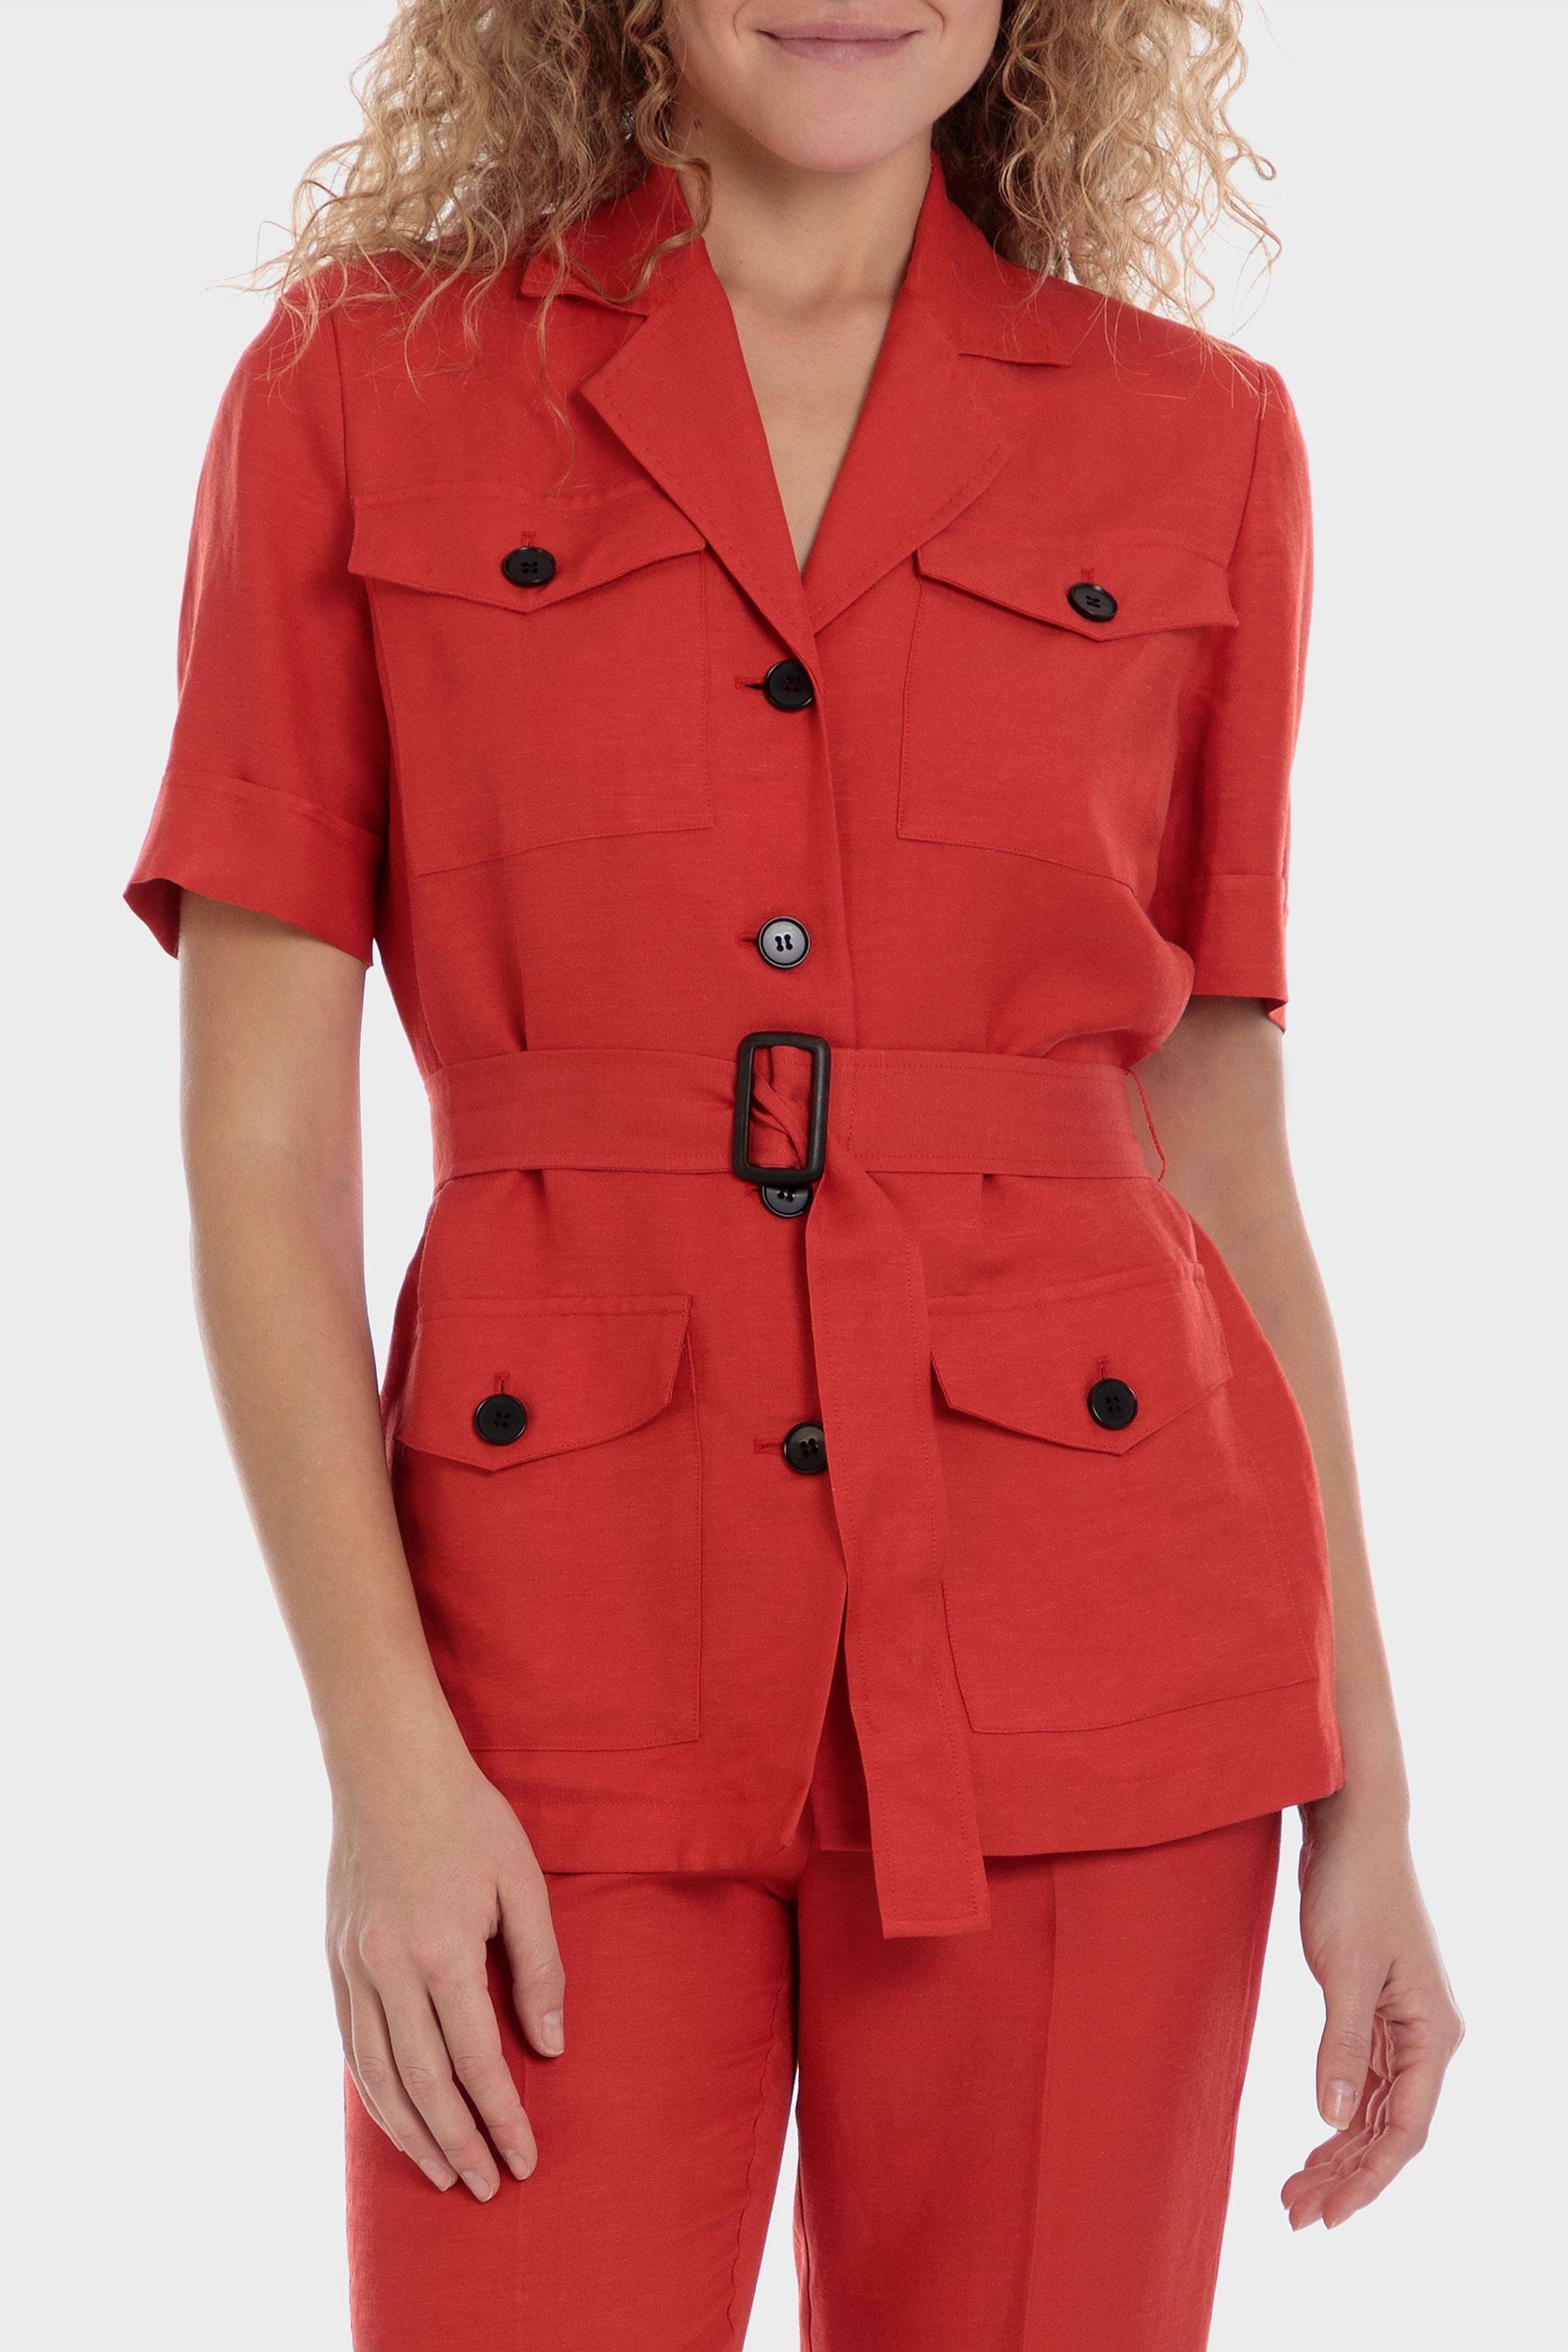 Punt Roma - Red Jacket With Pockets